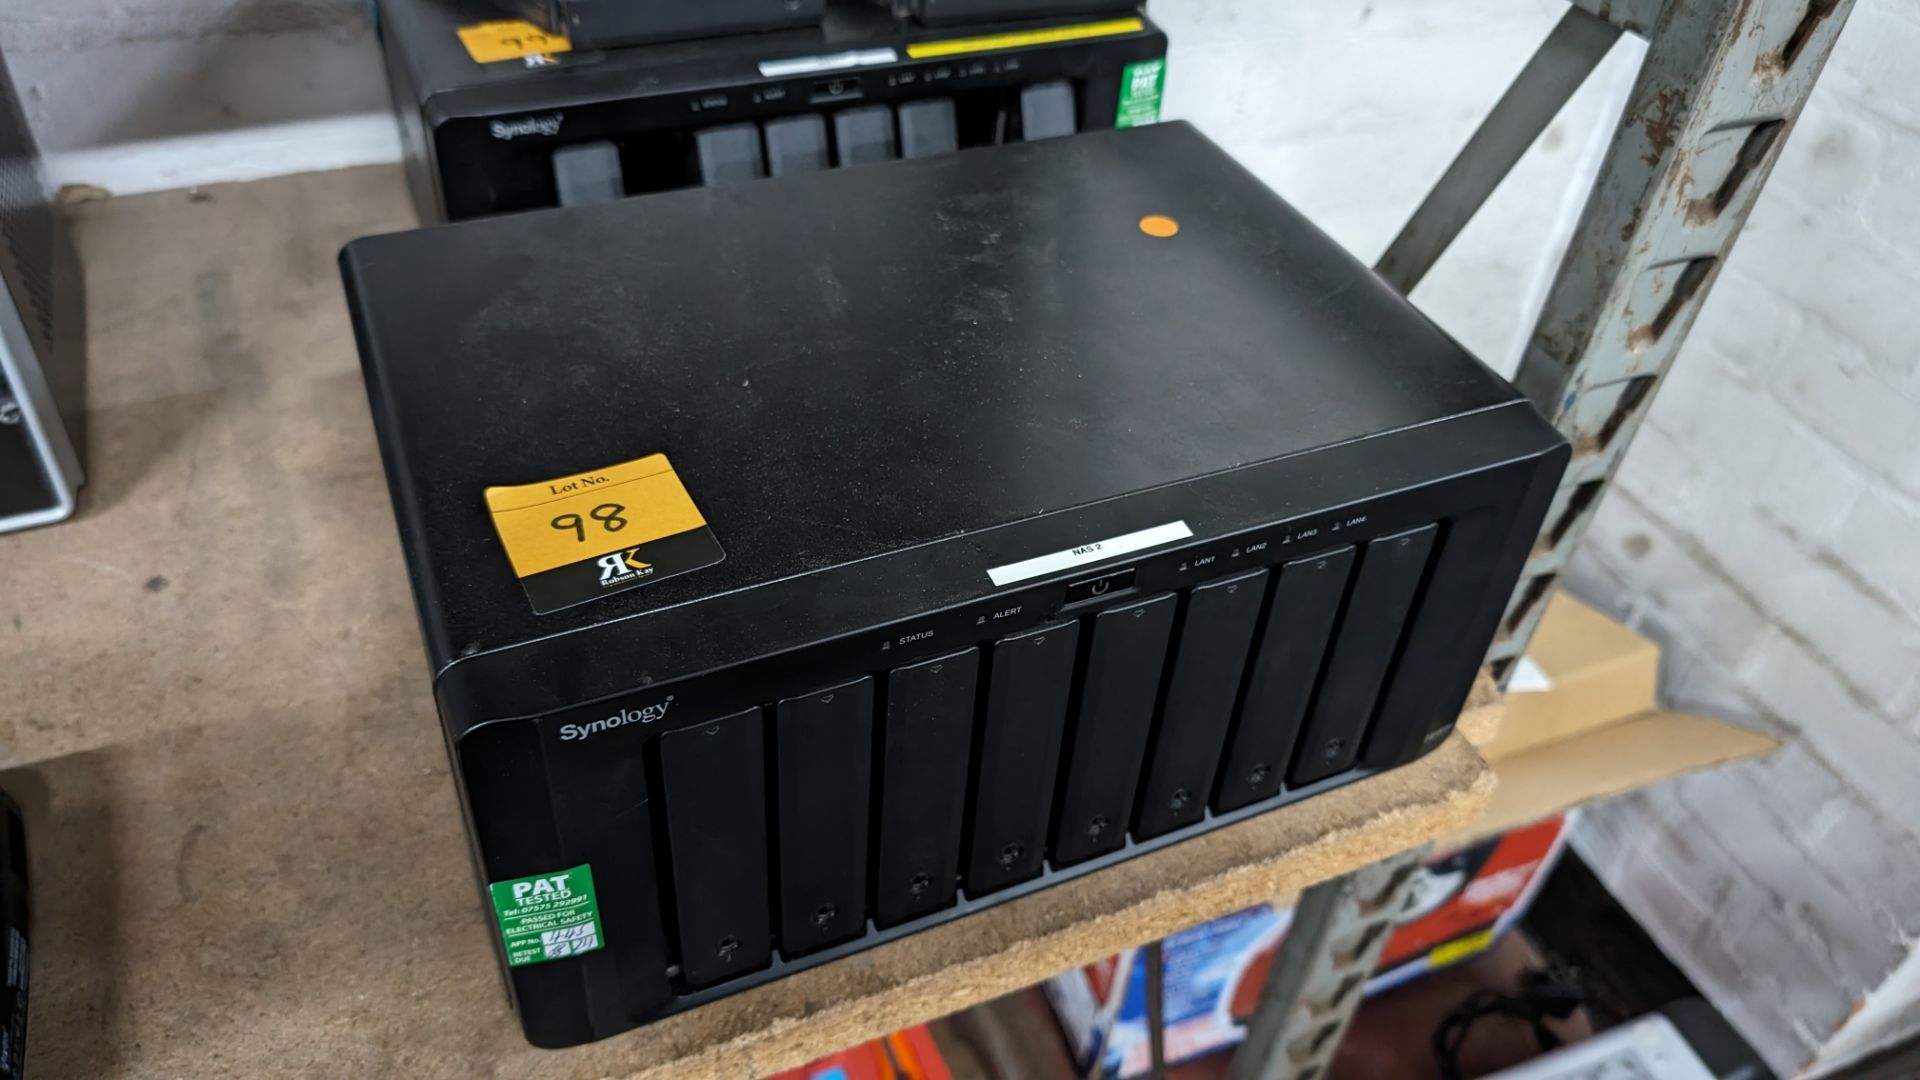 NAS drive with 8 x 5TB hard drives - Image 5 of 15